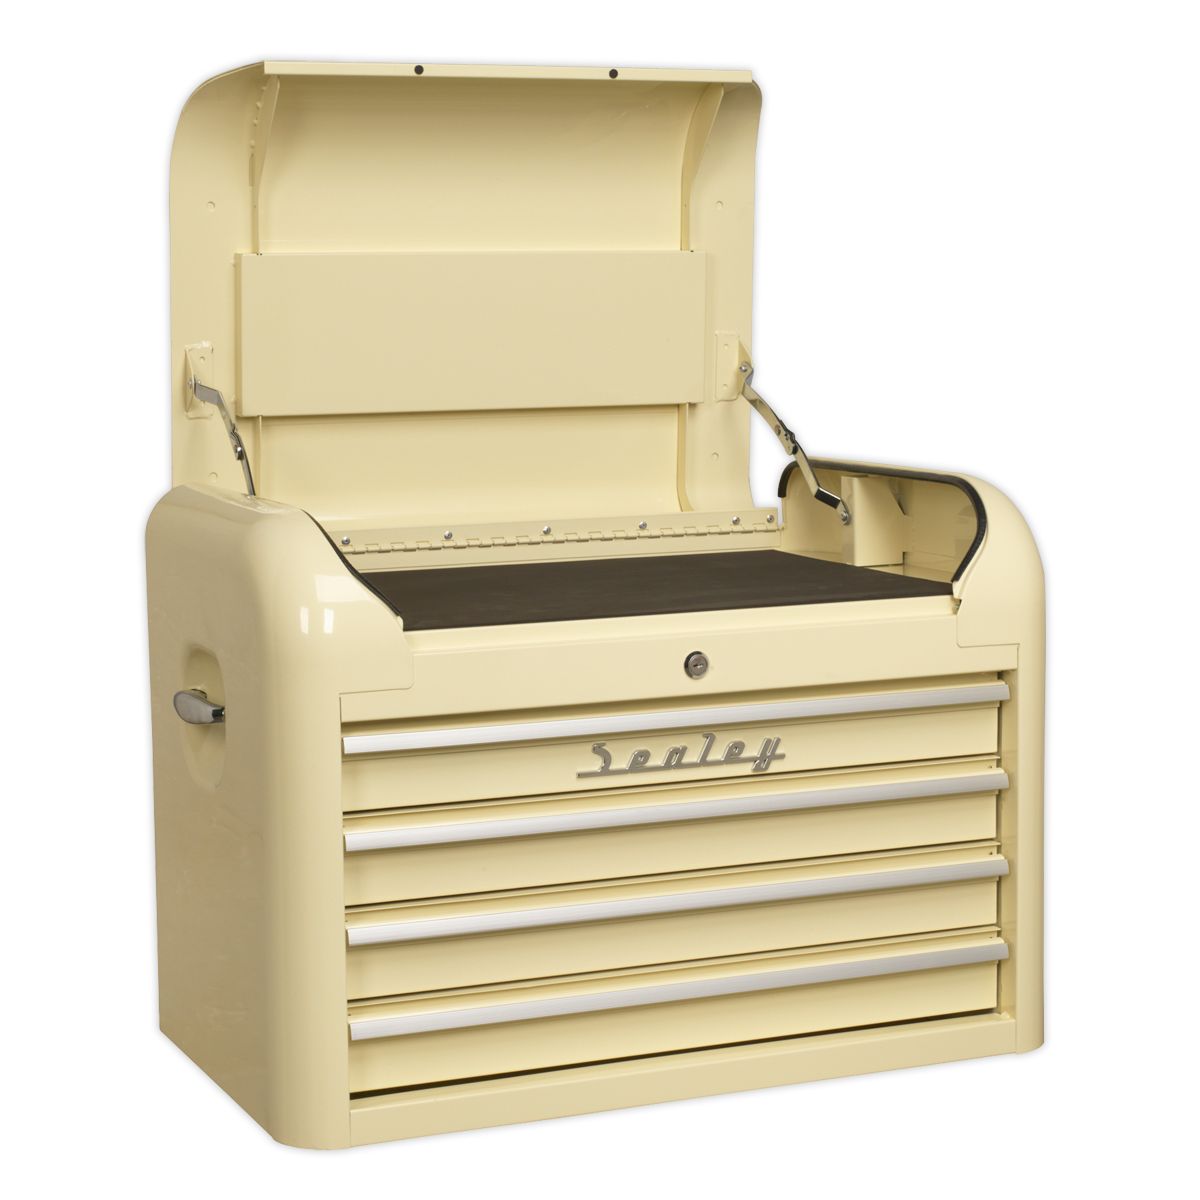 Sealey AP28COMBO2 Retro Style Topchest Mid-Box Tool Chest & Rollcab Combination 10 Drawer Cream